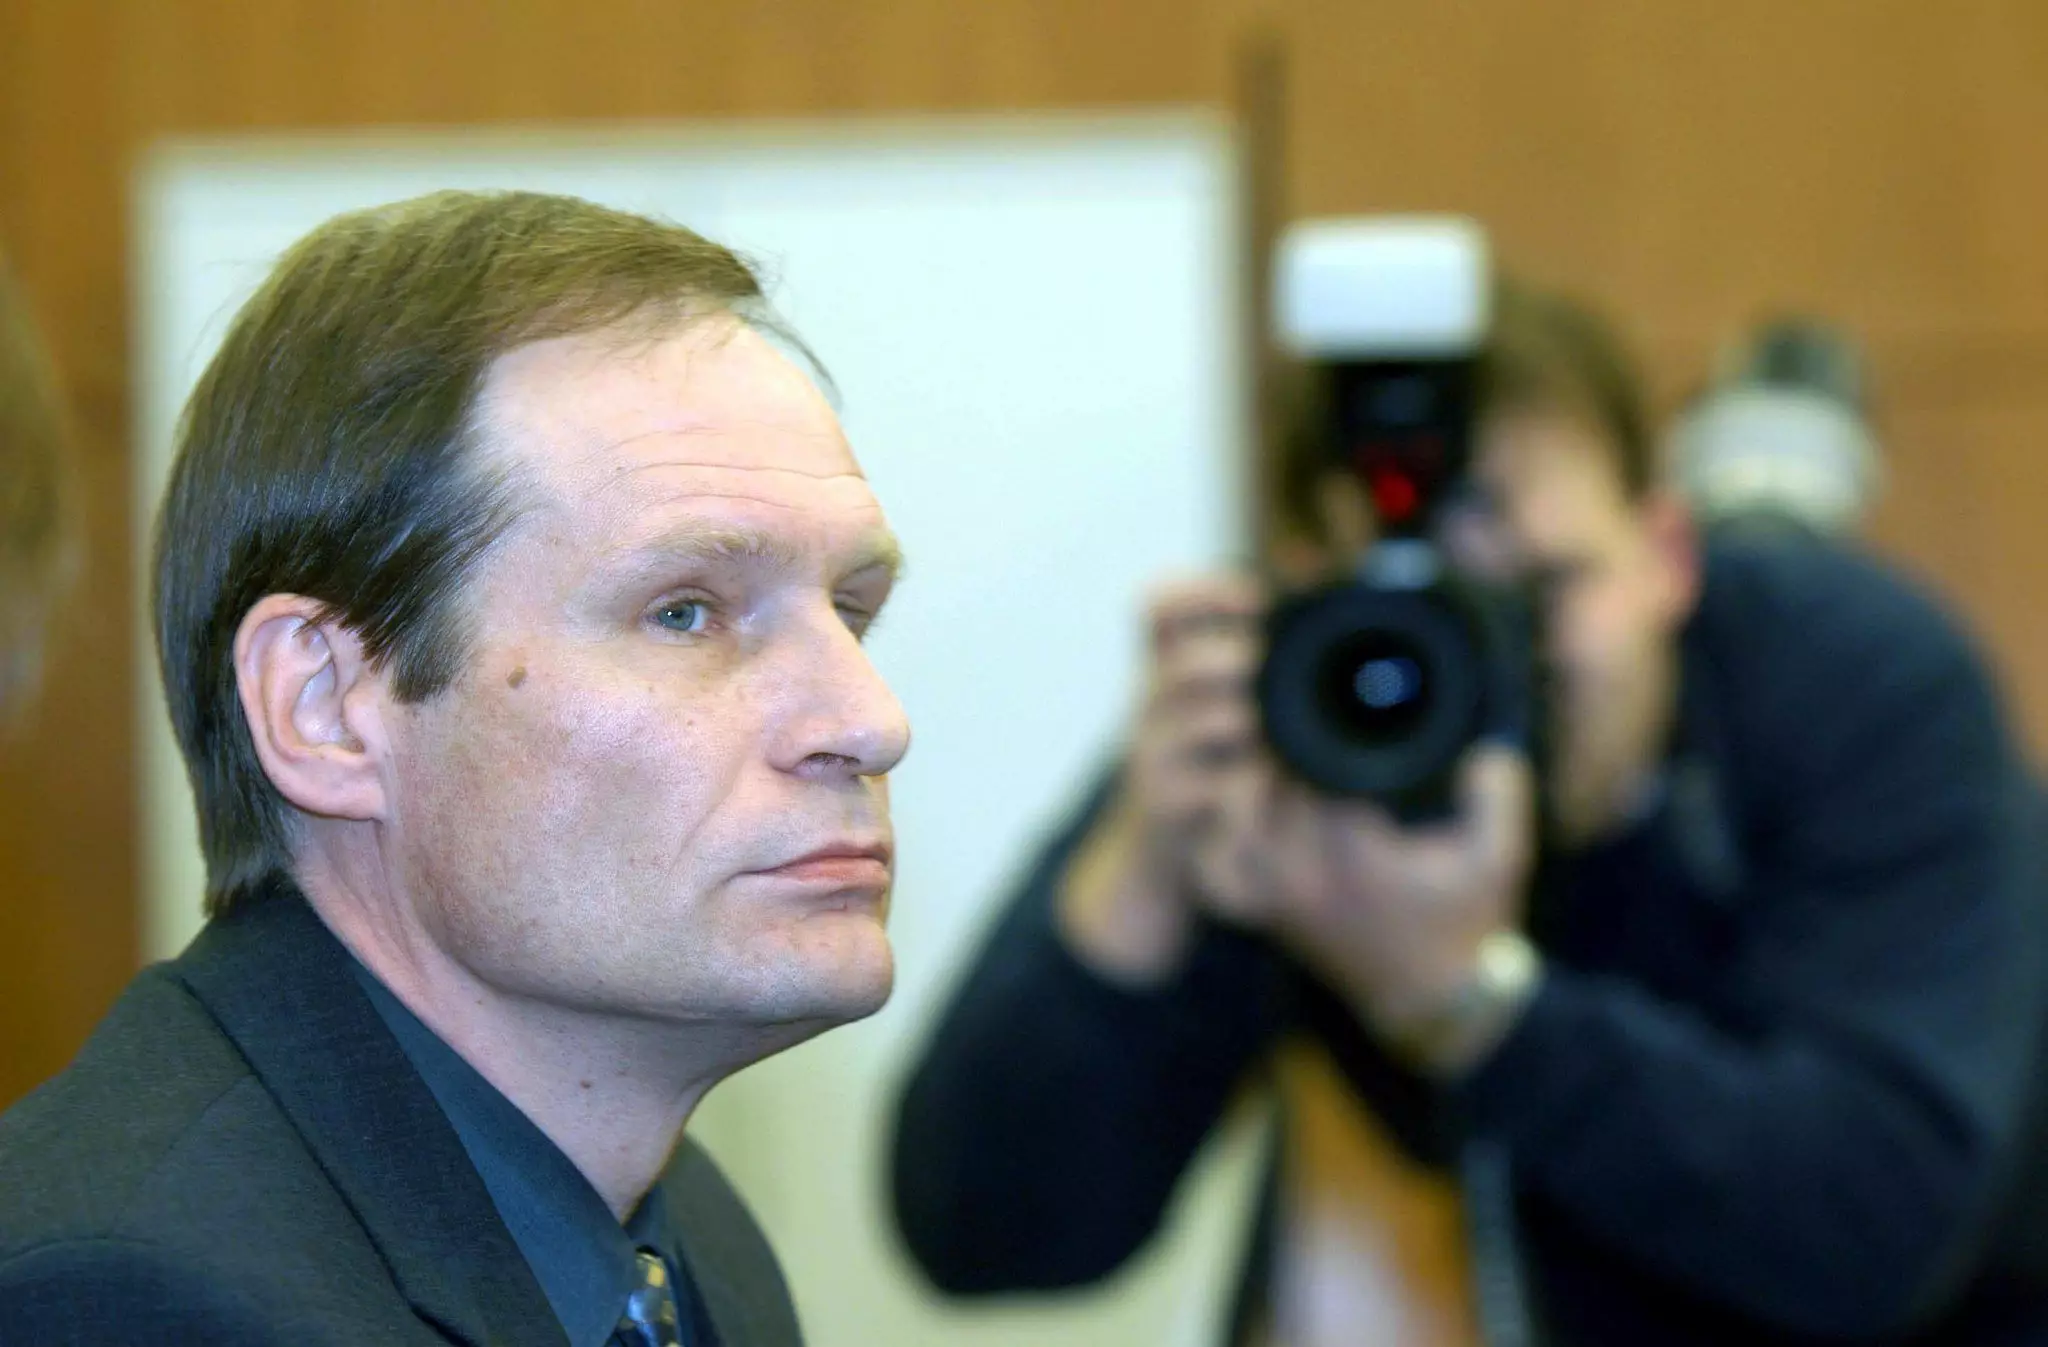 Armin Meiwes is allowed out of prison on day trips.